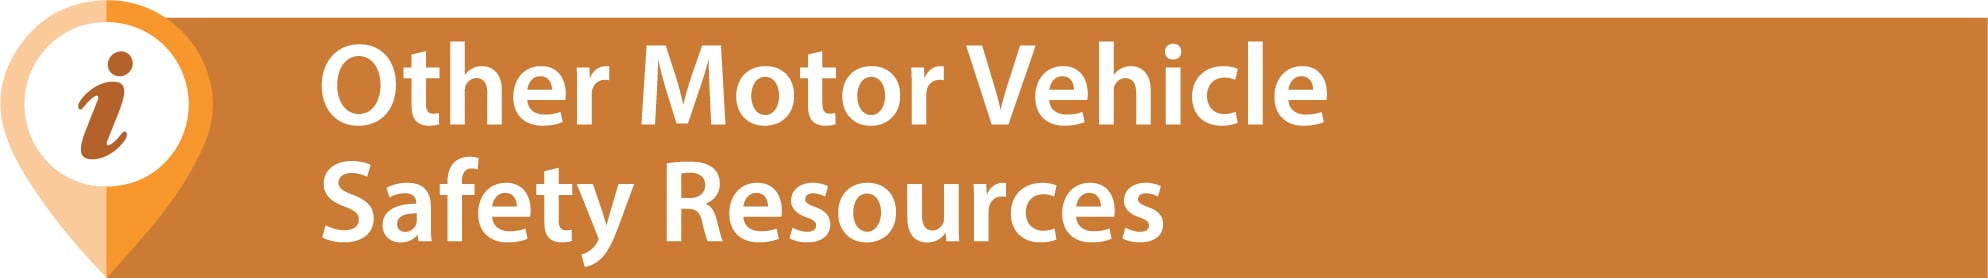 Other Motor Vehicle Safety Resources